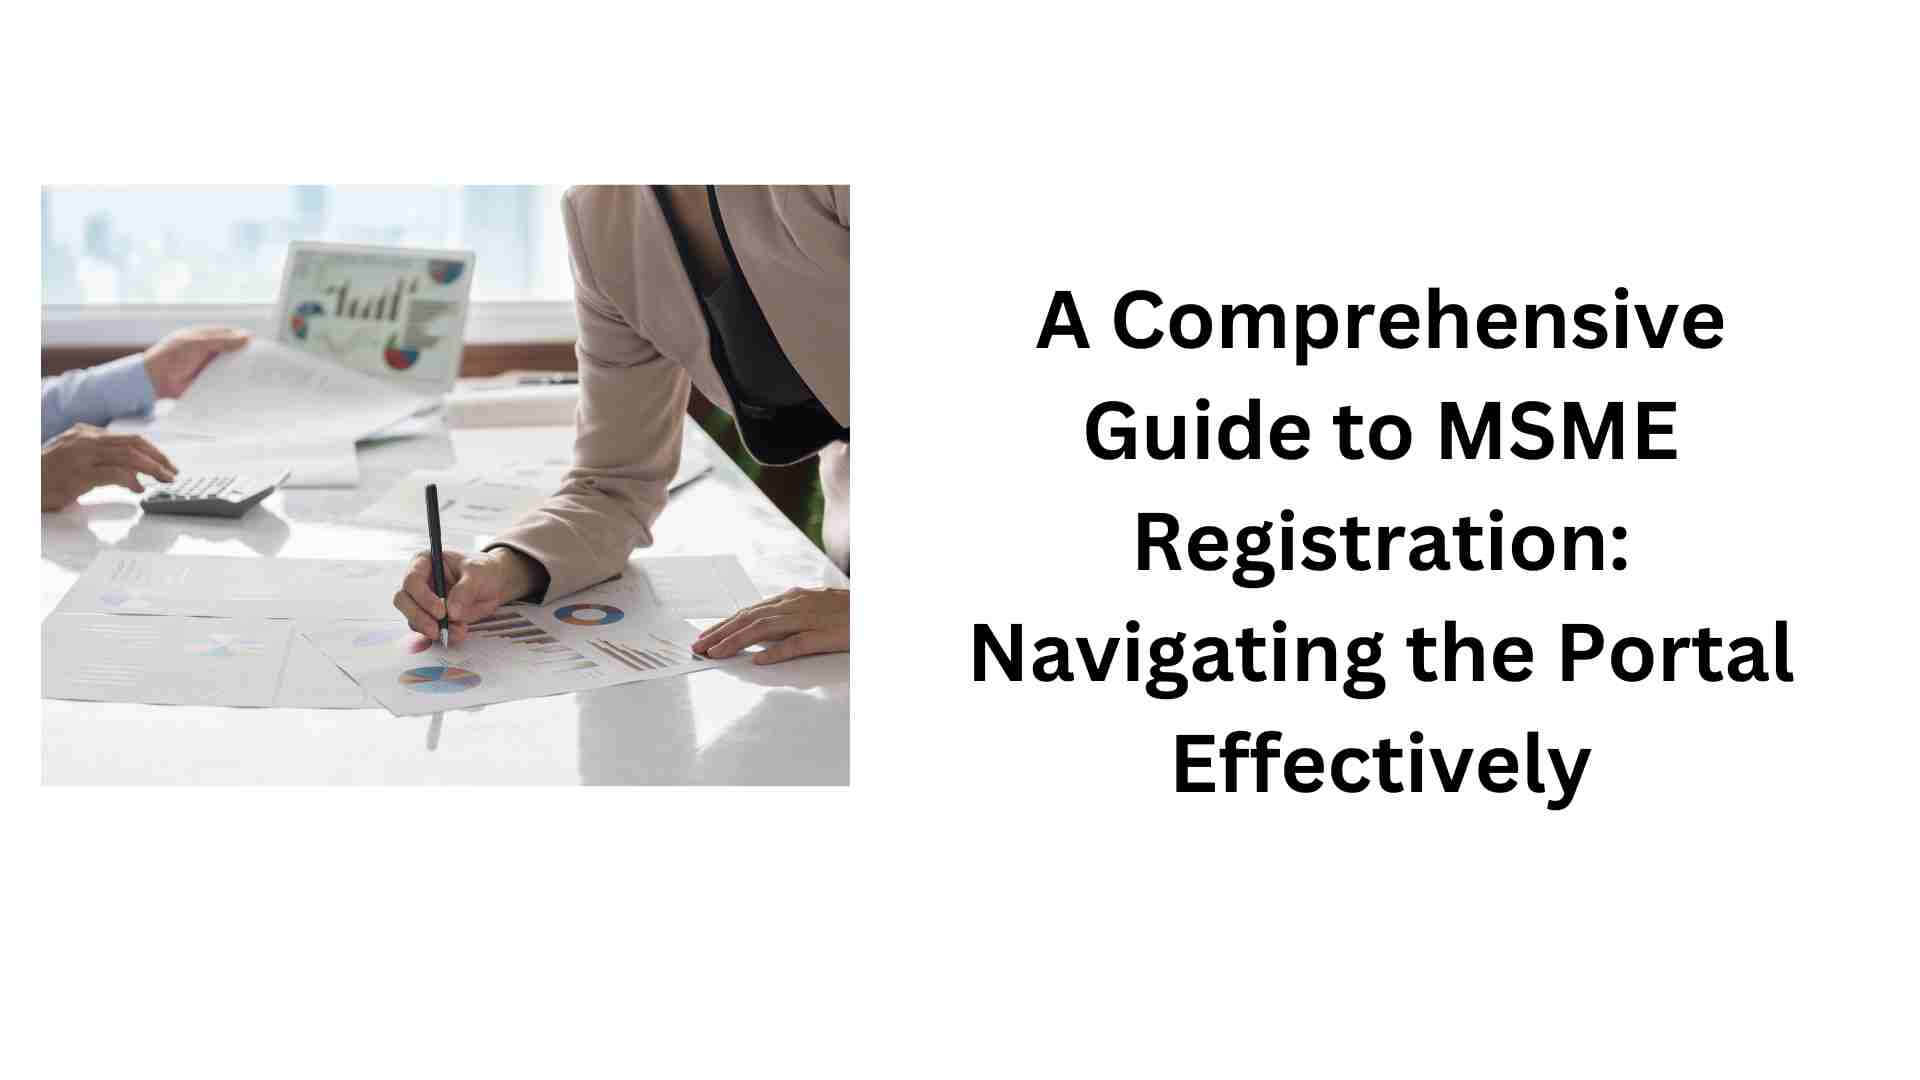 A Comprehensive Guide to MSME Registration Navigating the Portal Effectively